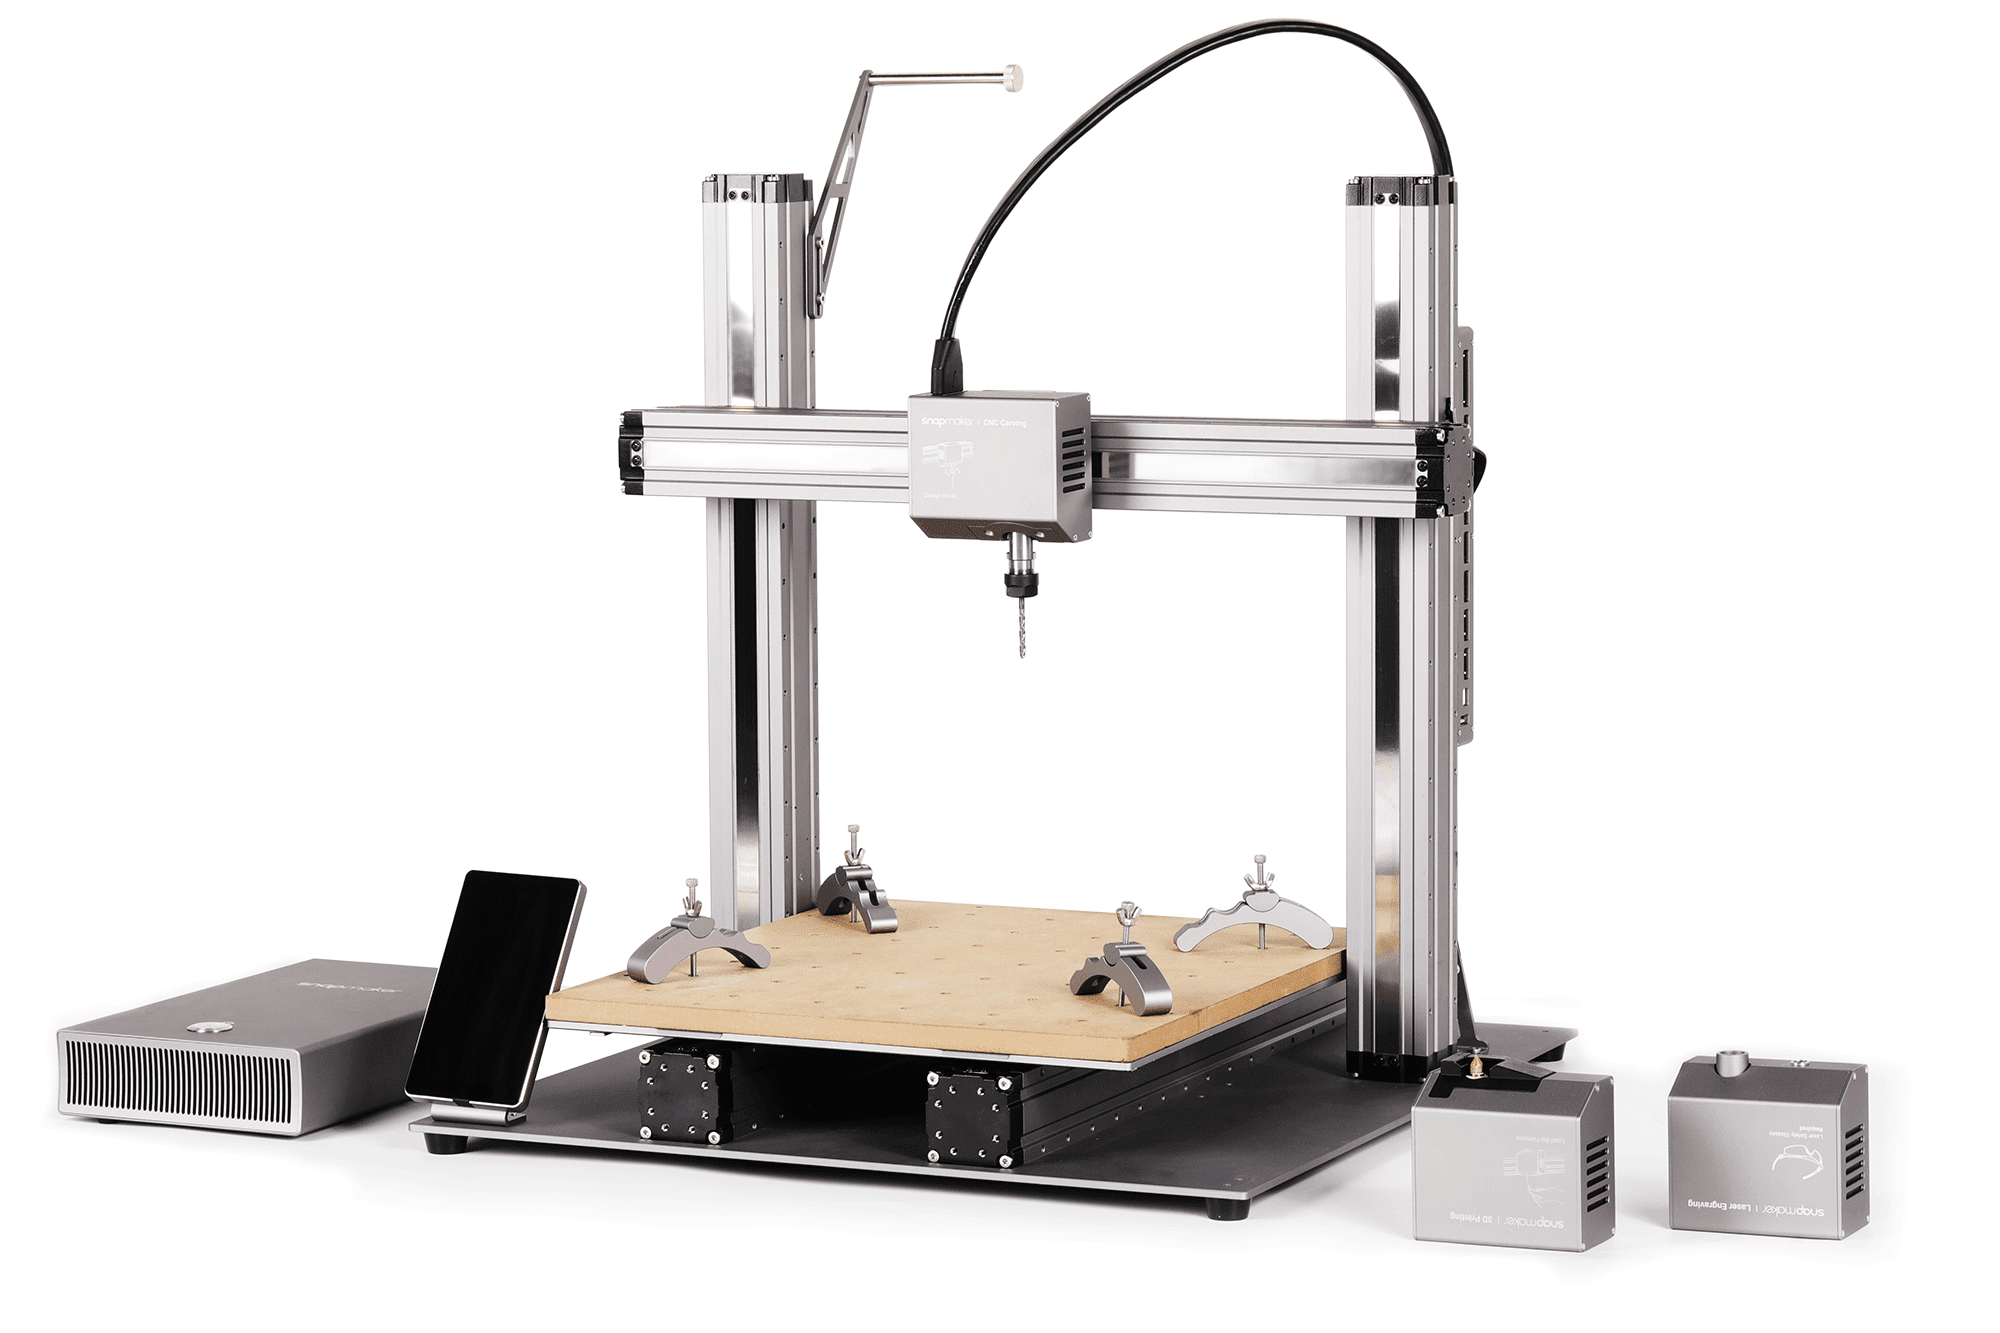 Snapmaker-2-0-3-in-1-3D-Printer-A350-80012-26330